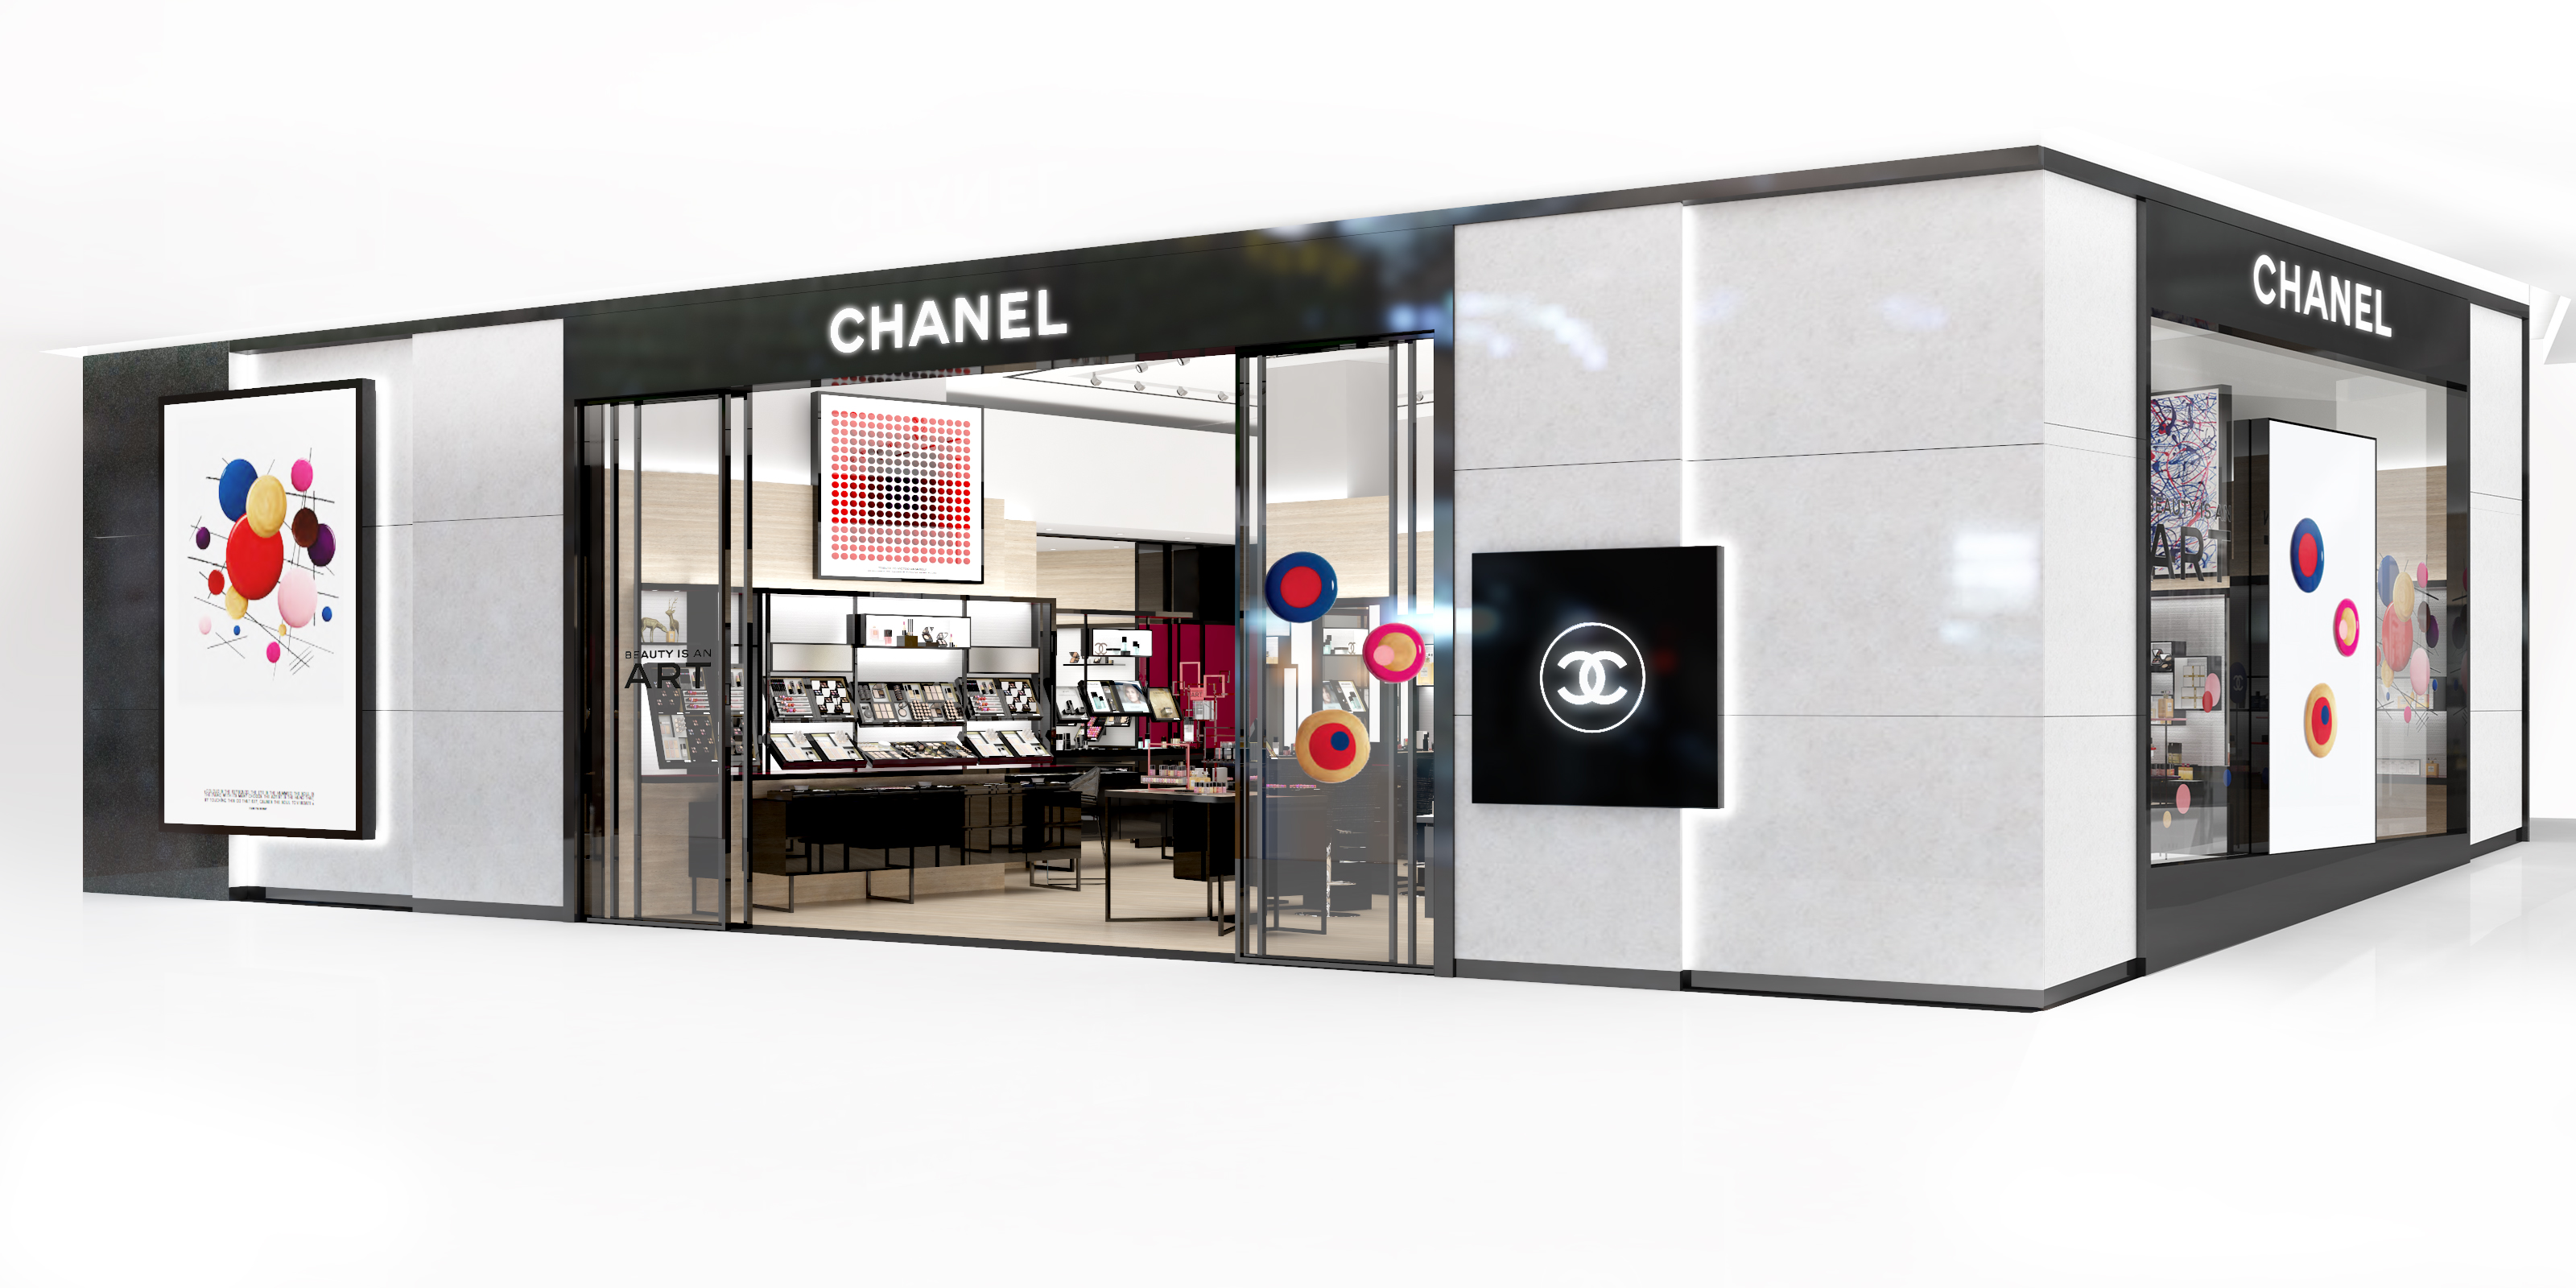 A Chanel store in a shopping mall  License download or print for 248   Photos  Picfair